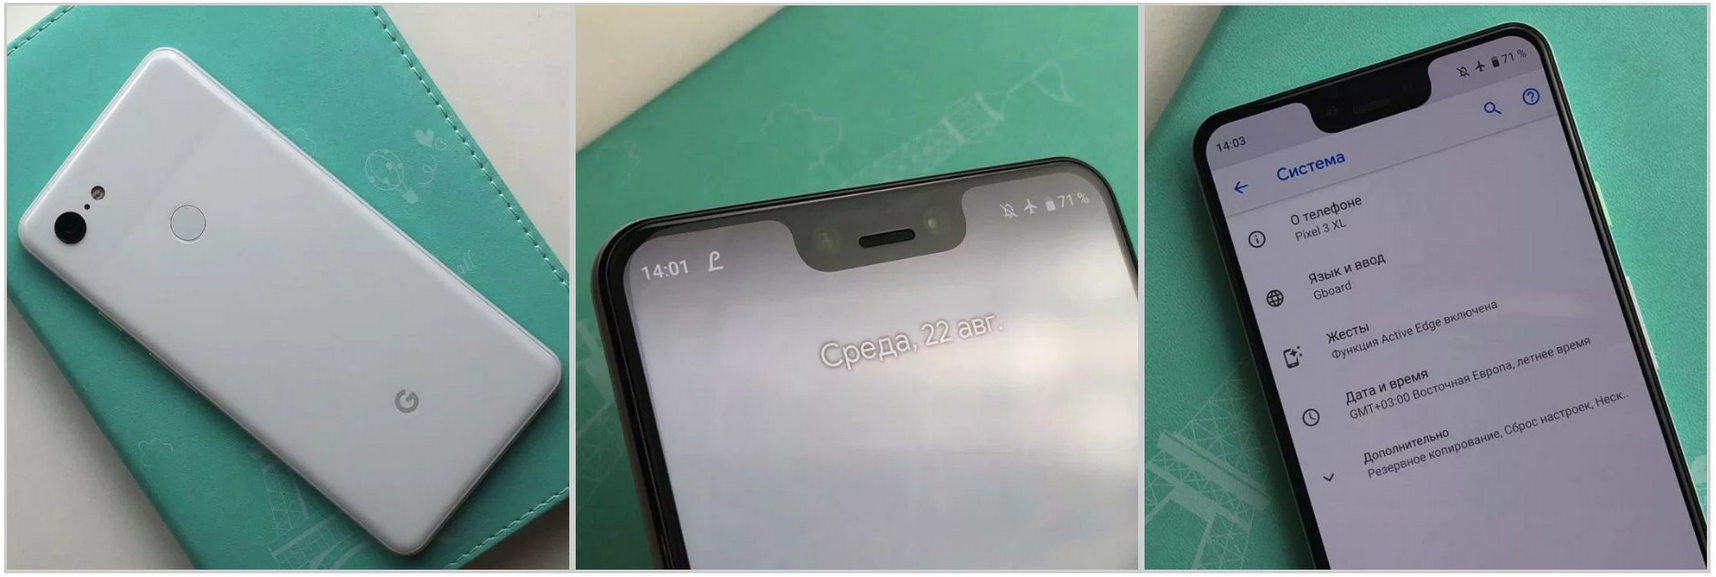 These photos allegedly show some of the Pixel 3 XL units sold in the Ukrainian black market - Google Pixel 3 XL listed for sale on black market, priced at $2000 each